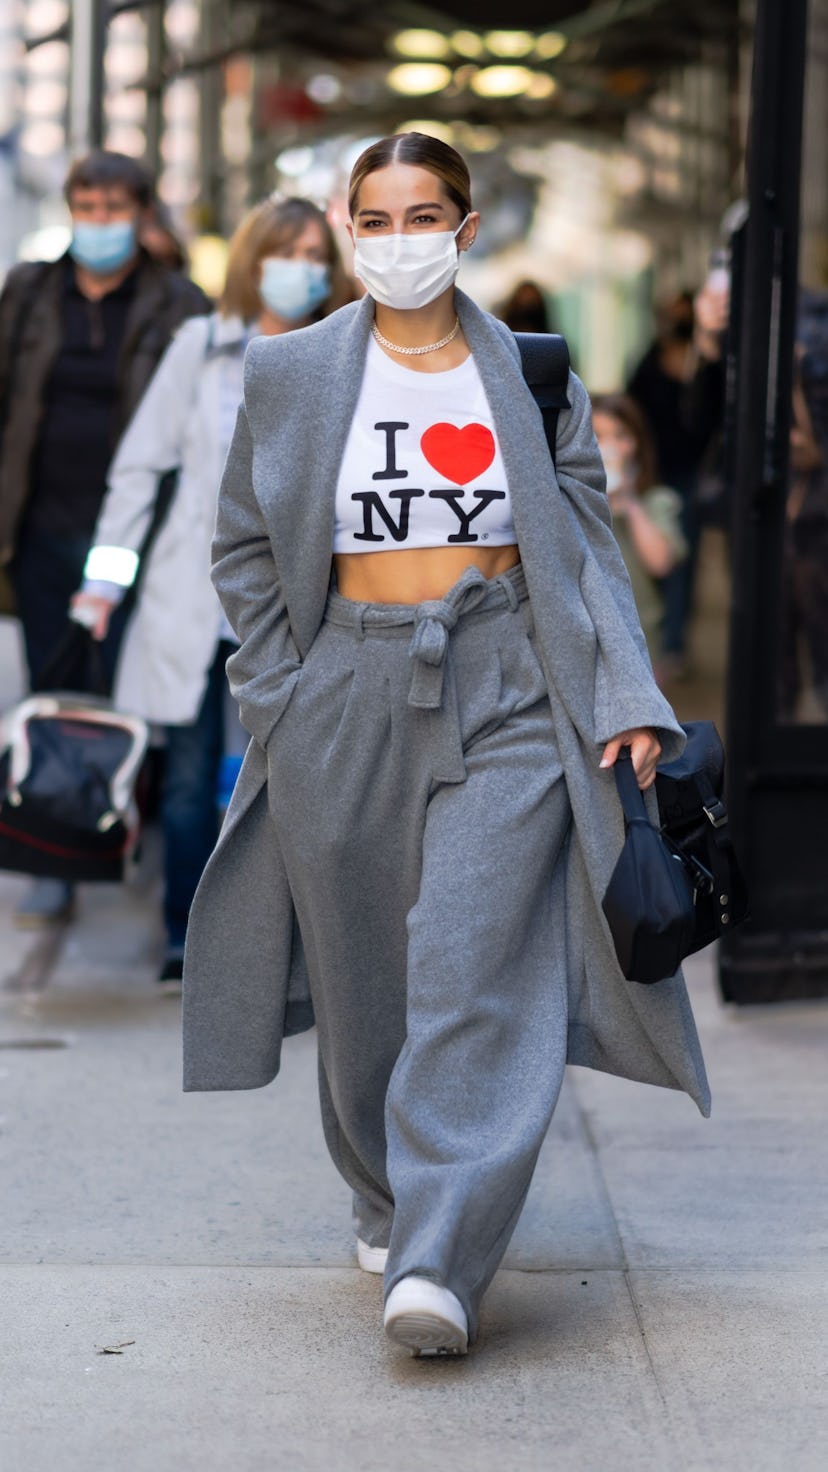 Addison Rae wearing one of her best outfits: a gray pantsuit with an NYC tourist t-shirt